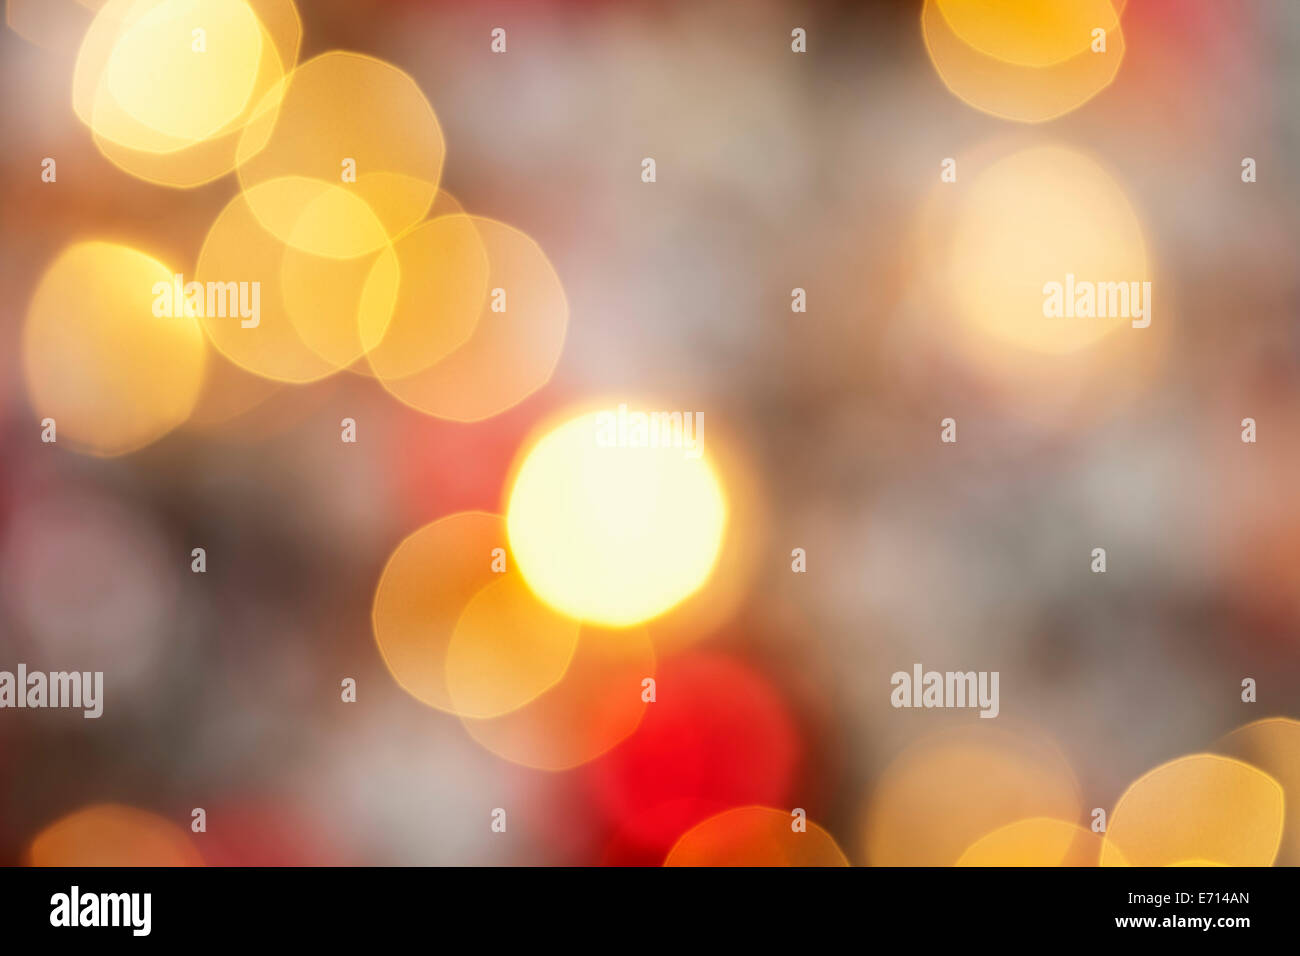 Blurred flares at christmas time Stock Photo